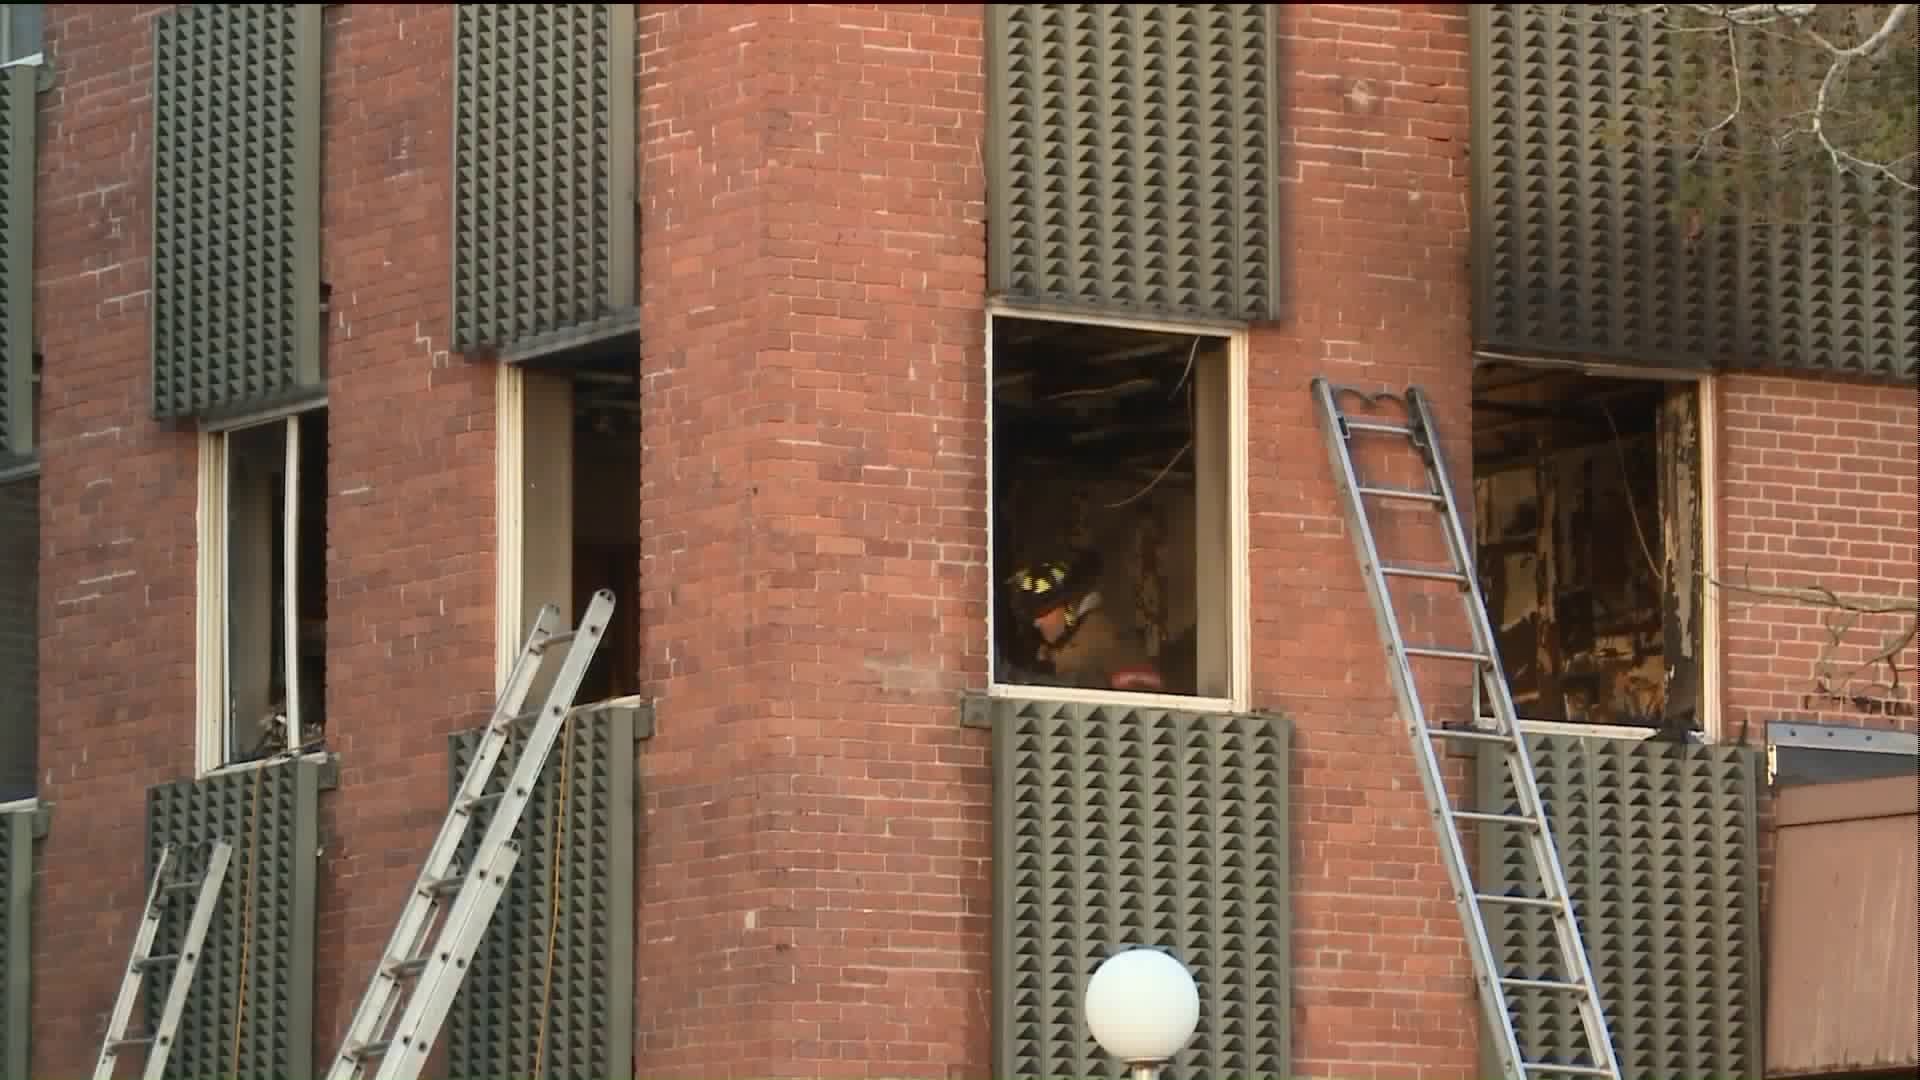 Wallingford crews responding to fire in elderly apartment complex; one hospitalized